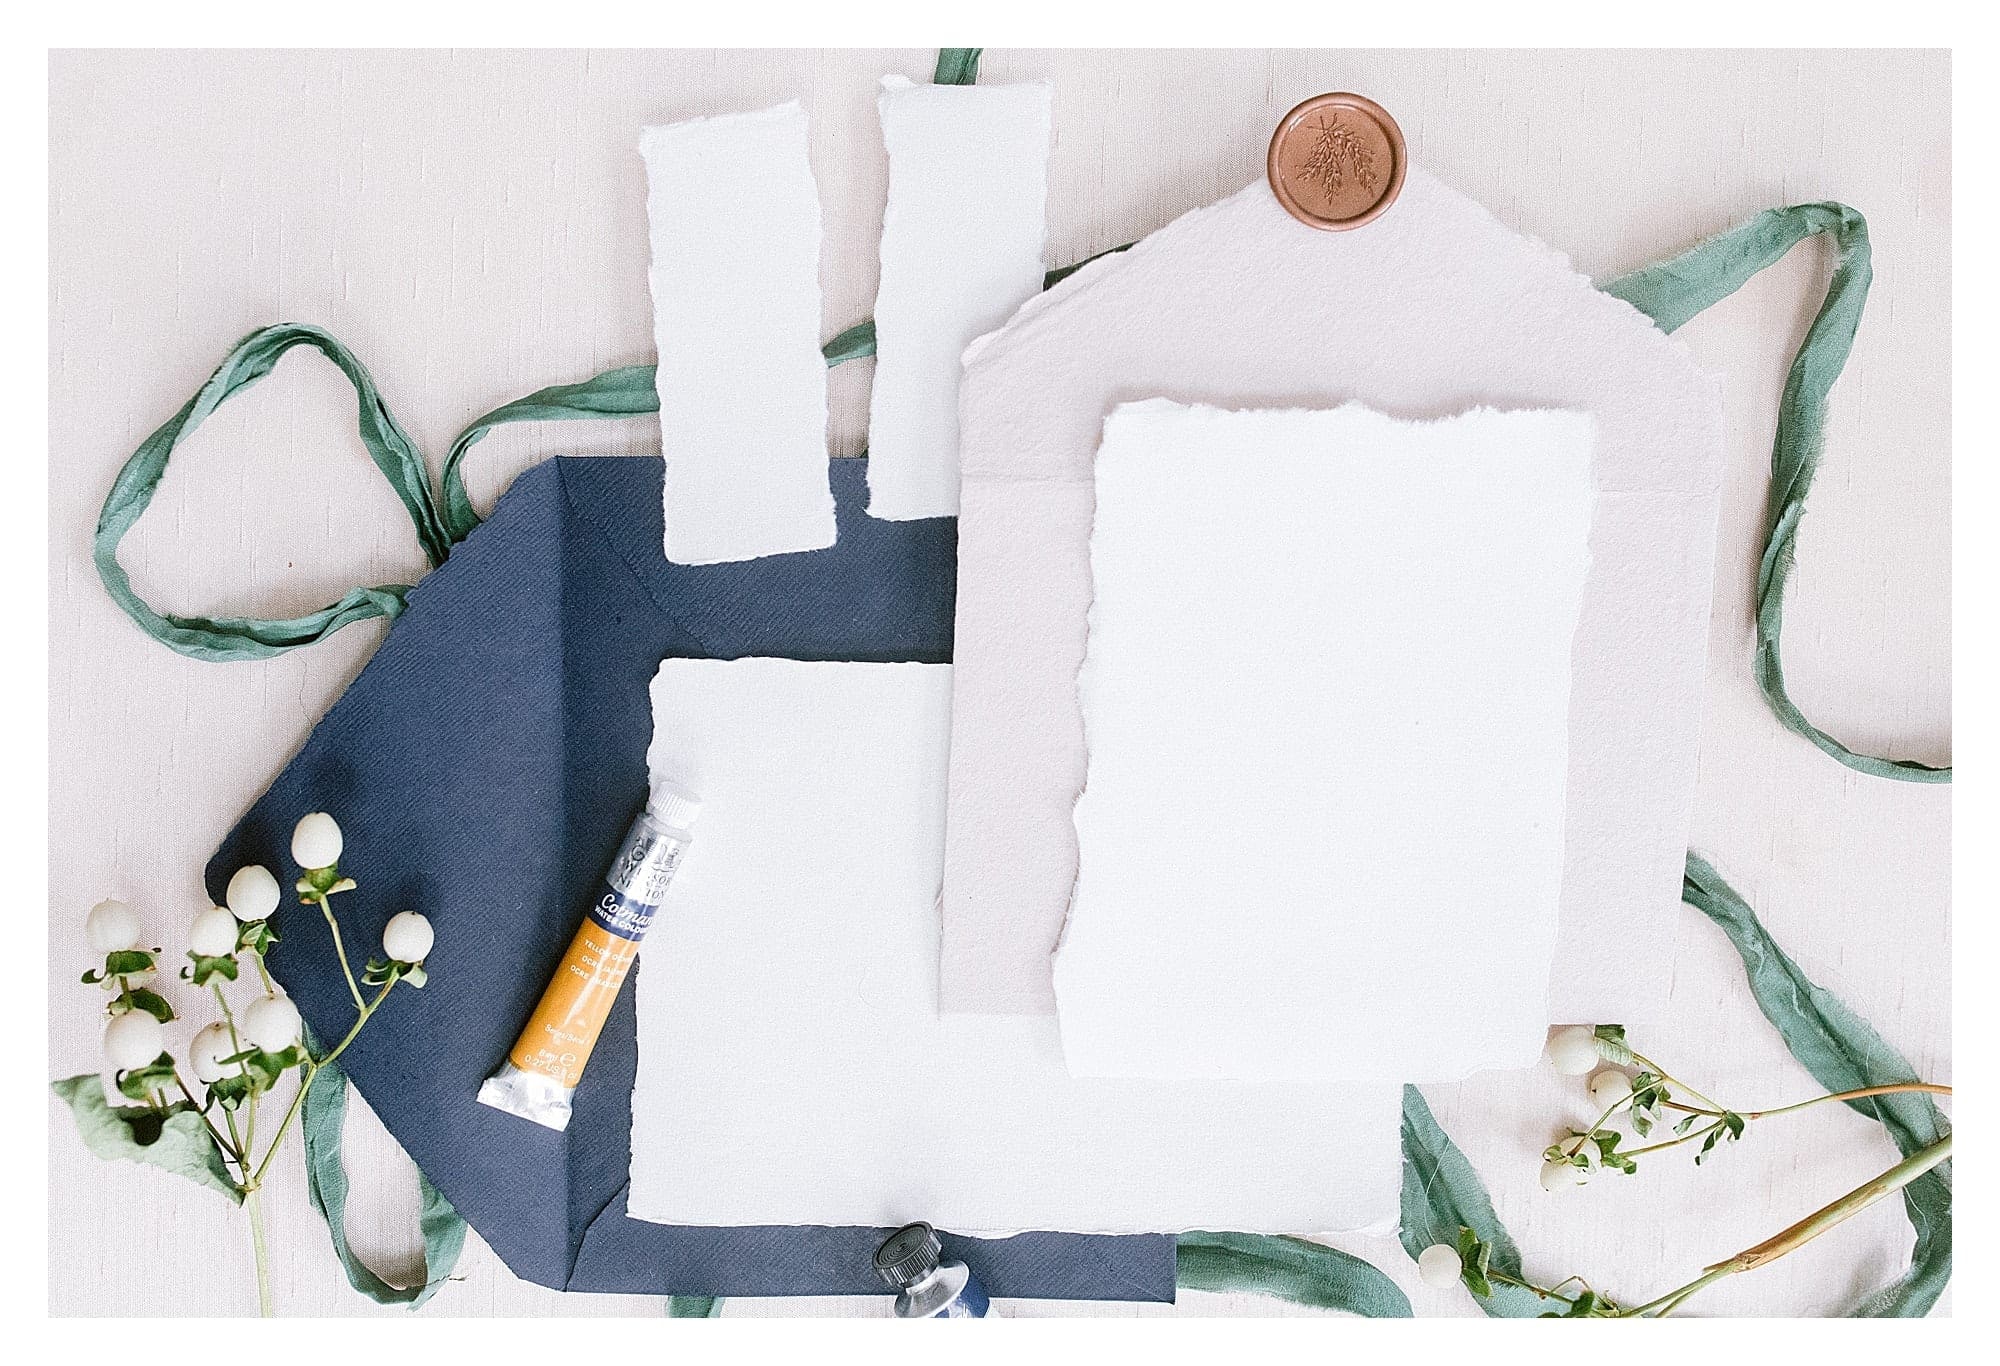 Calligraphy paper and envelope flatlay with green foliage and small silver paint tubes photography by Kathy Beaver